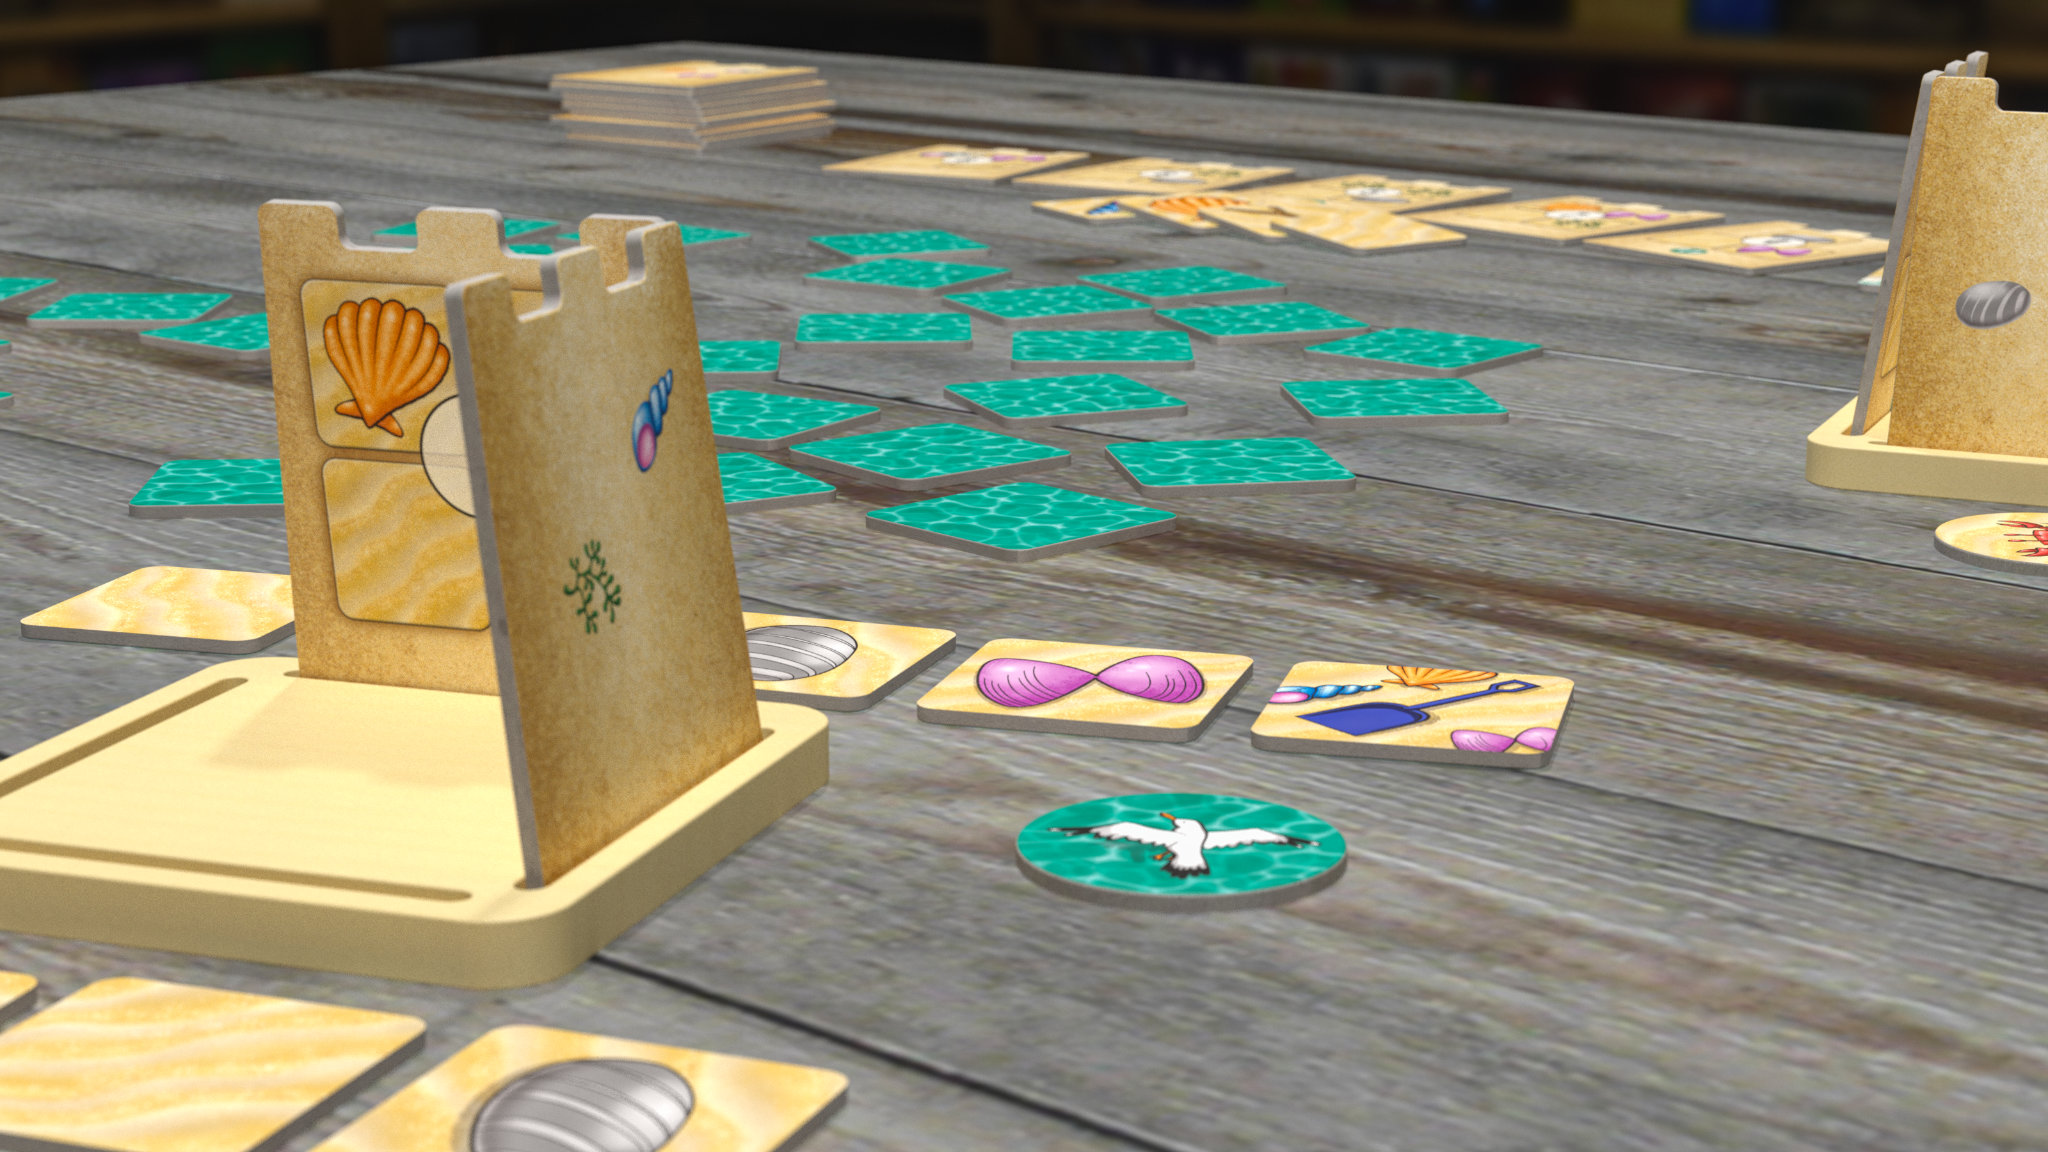 A wide shot of the game in play on a table. There is a partially built sand castle in the foreground, and another at the back right. Between them are decoration tiles and some helpful critters.